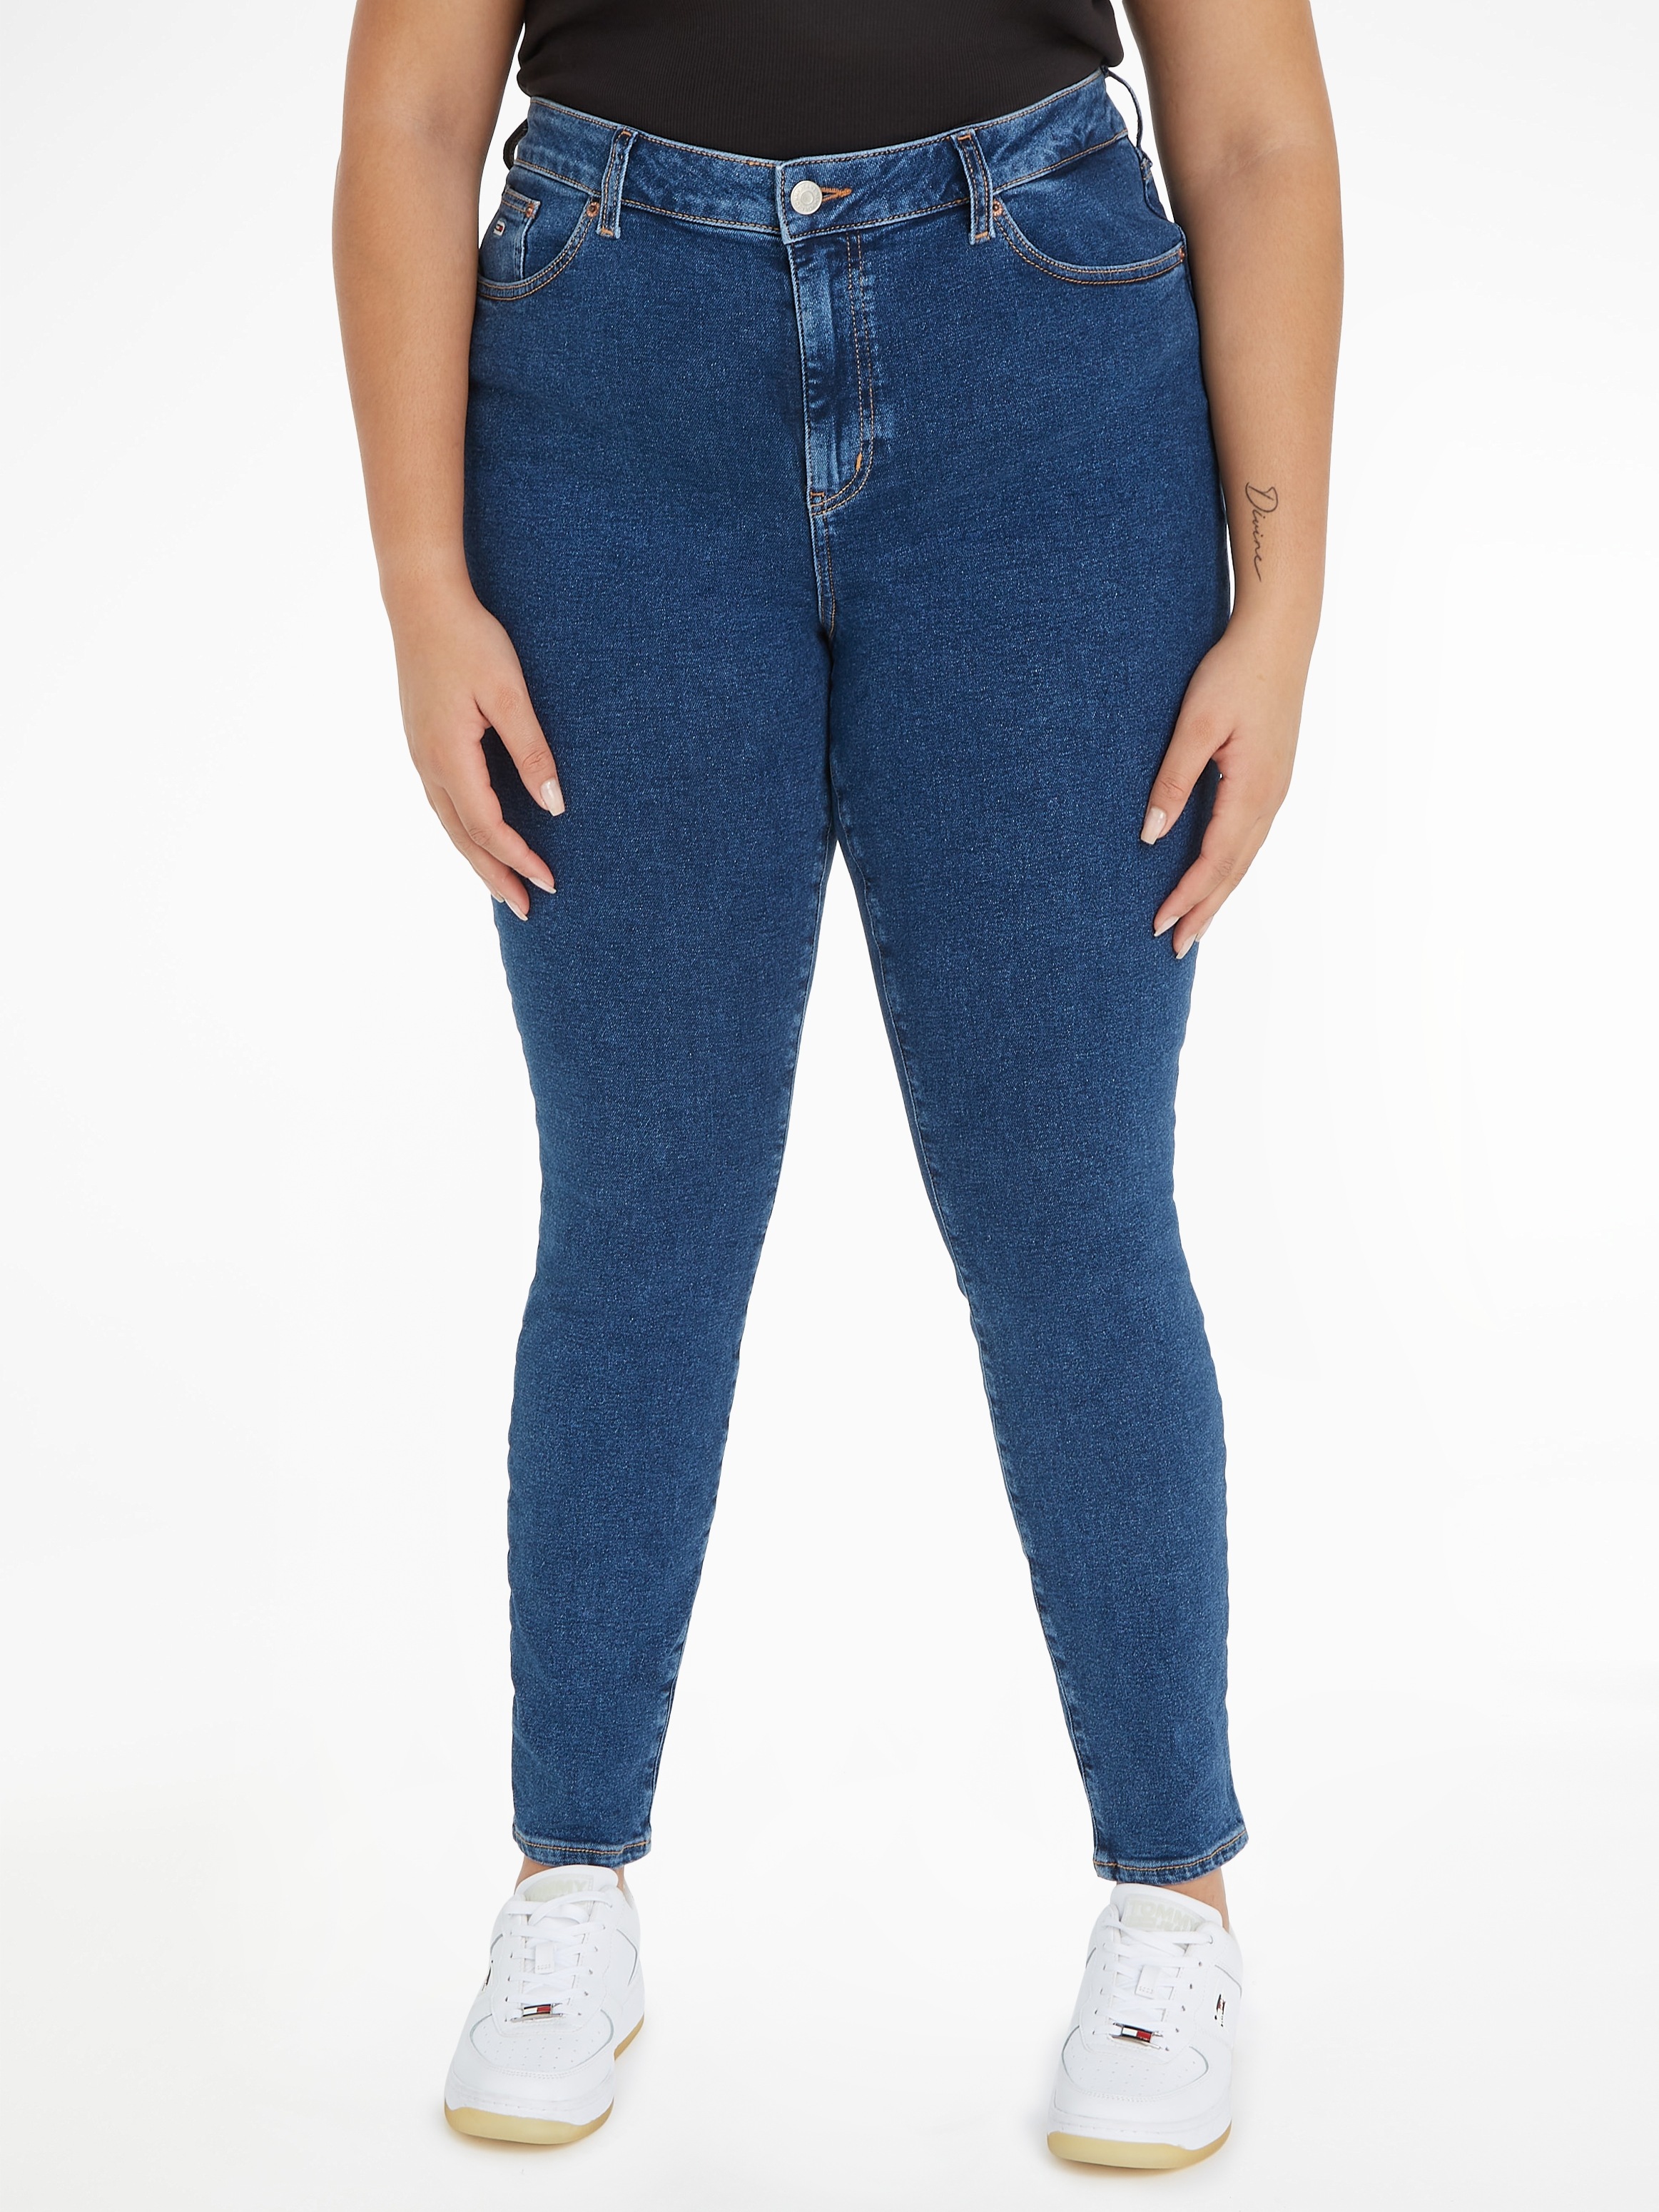 Tommy Jeans Jeans CURVE, bei OTTOversand Skinny-fit-Jeans, SIZE angeboten Curve PLUS Weiten in wird